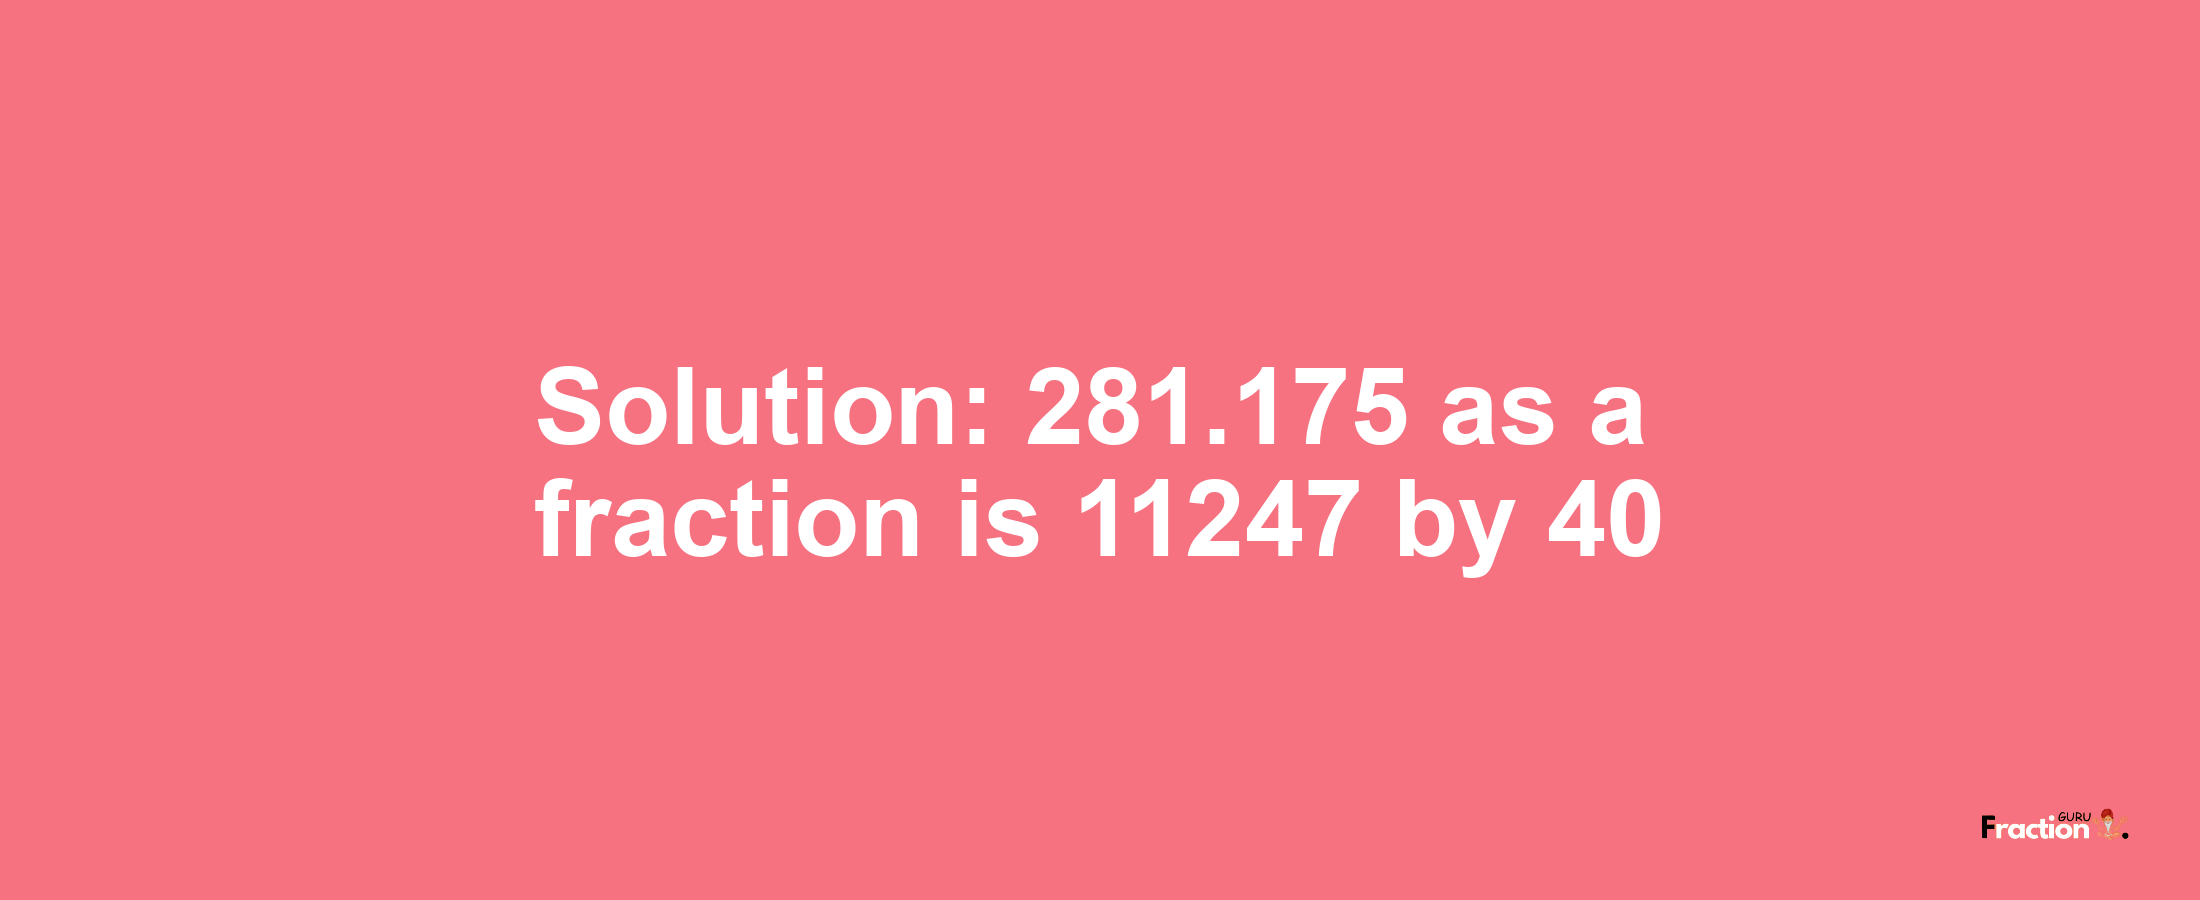 Solution:281.175 as a fraction is 11247/40